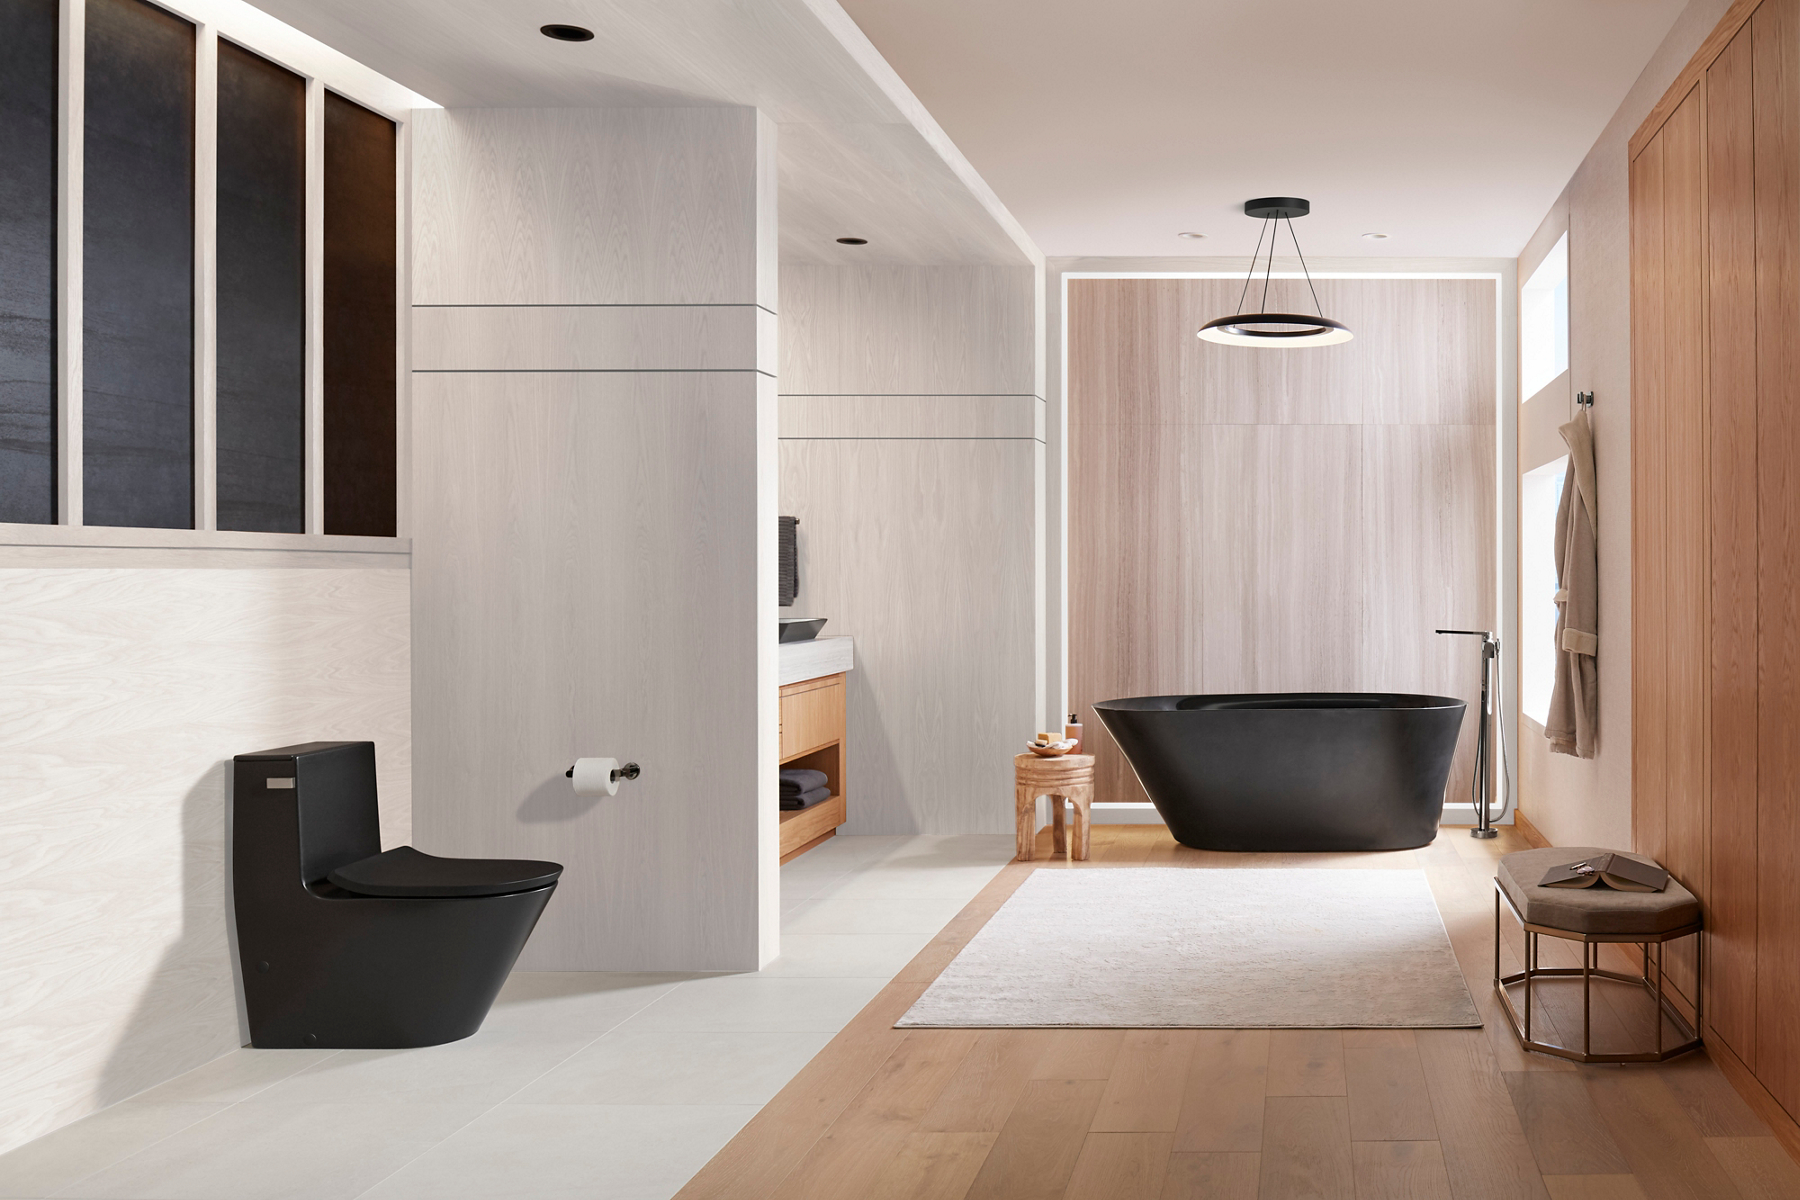 A modern bathroom in off-white and light natural wood tones with honed black Brazn collection products.